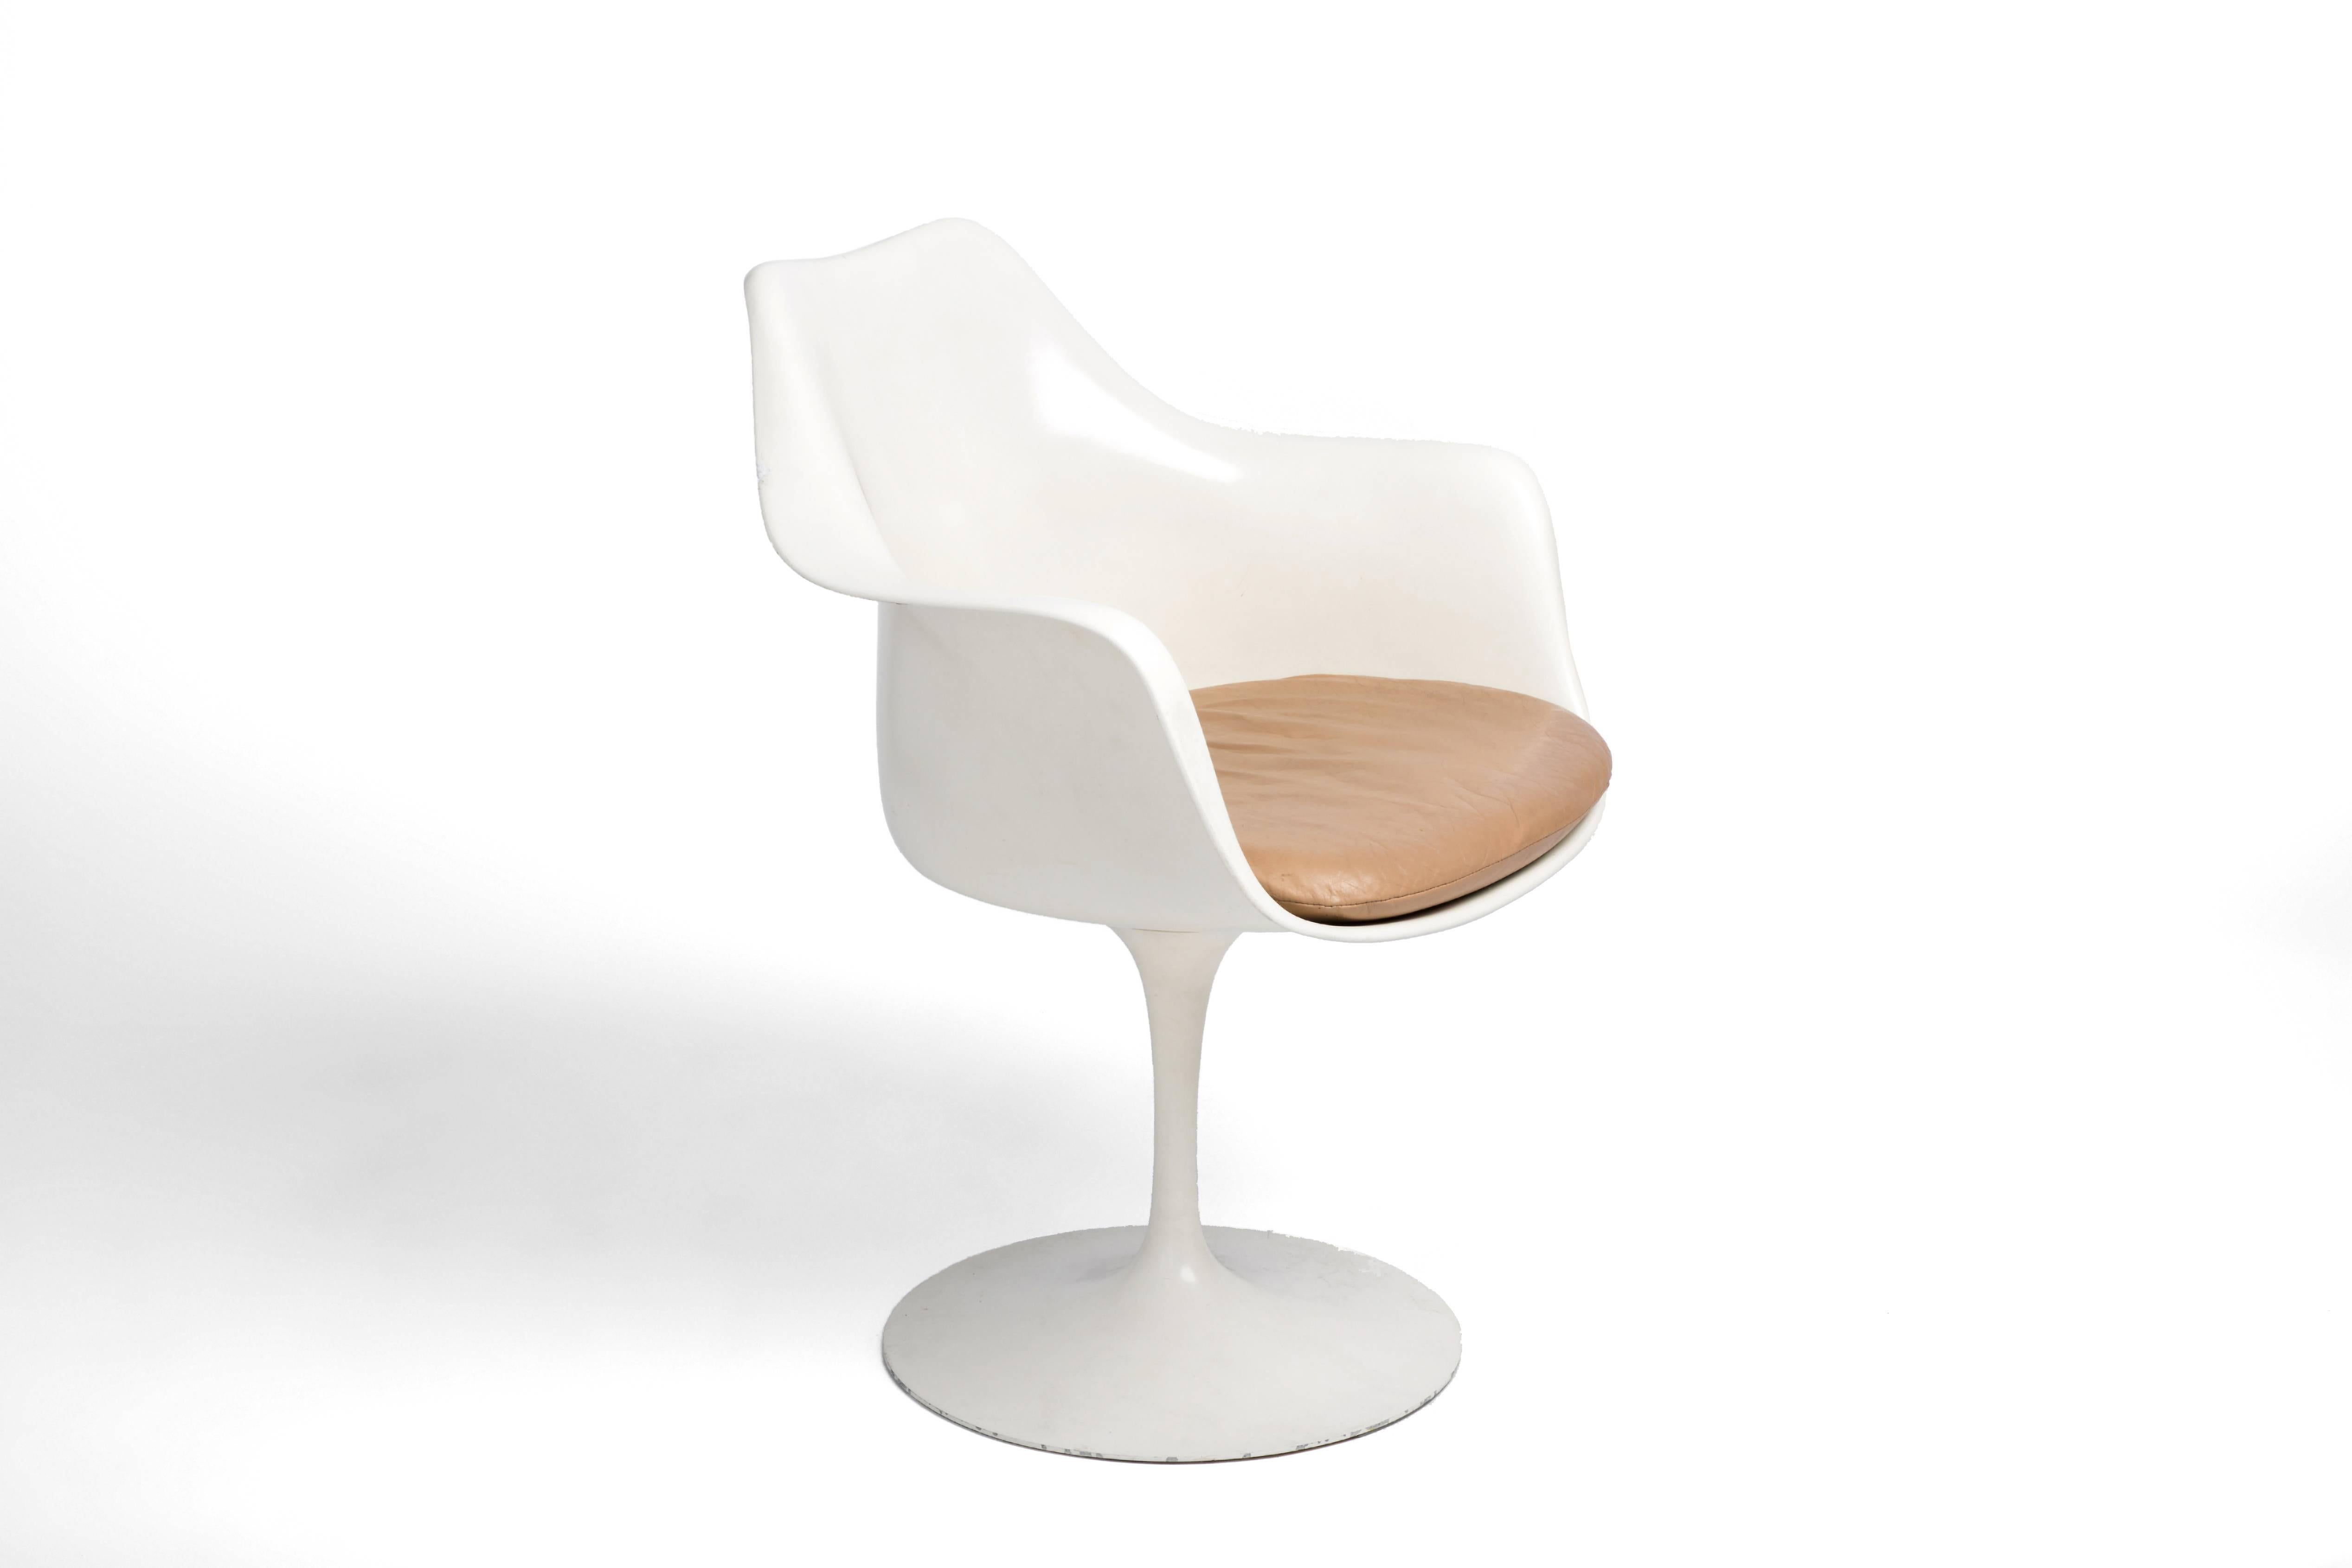 Four identical tulip chairs, structurally sound. 

Original warm white finish.

Caramel leather seat cushion can be recovered at an additional cost.